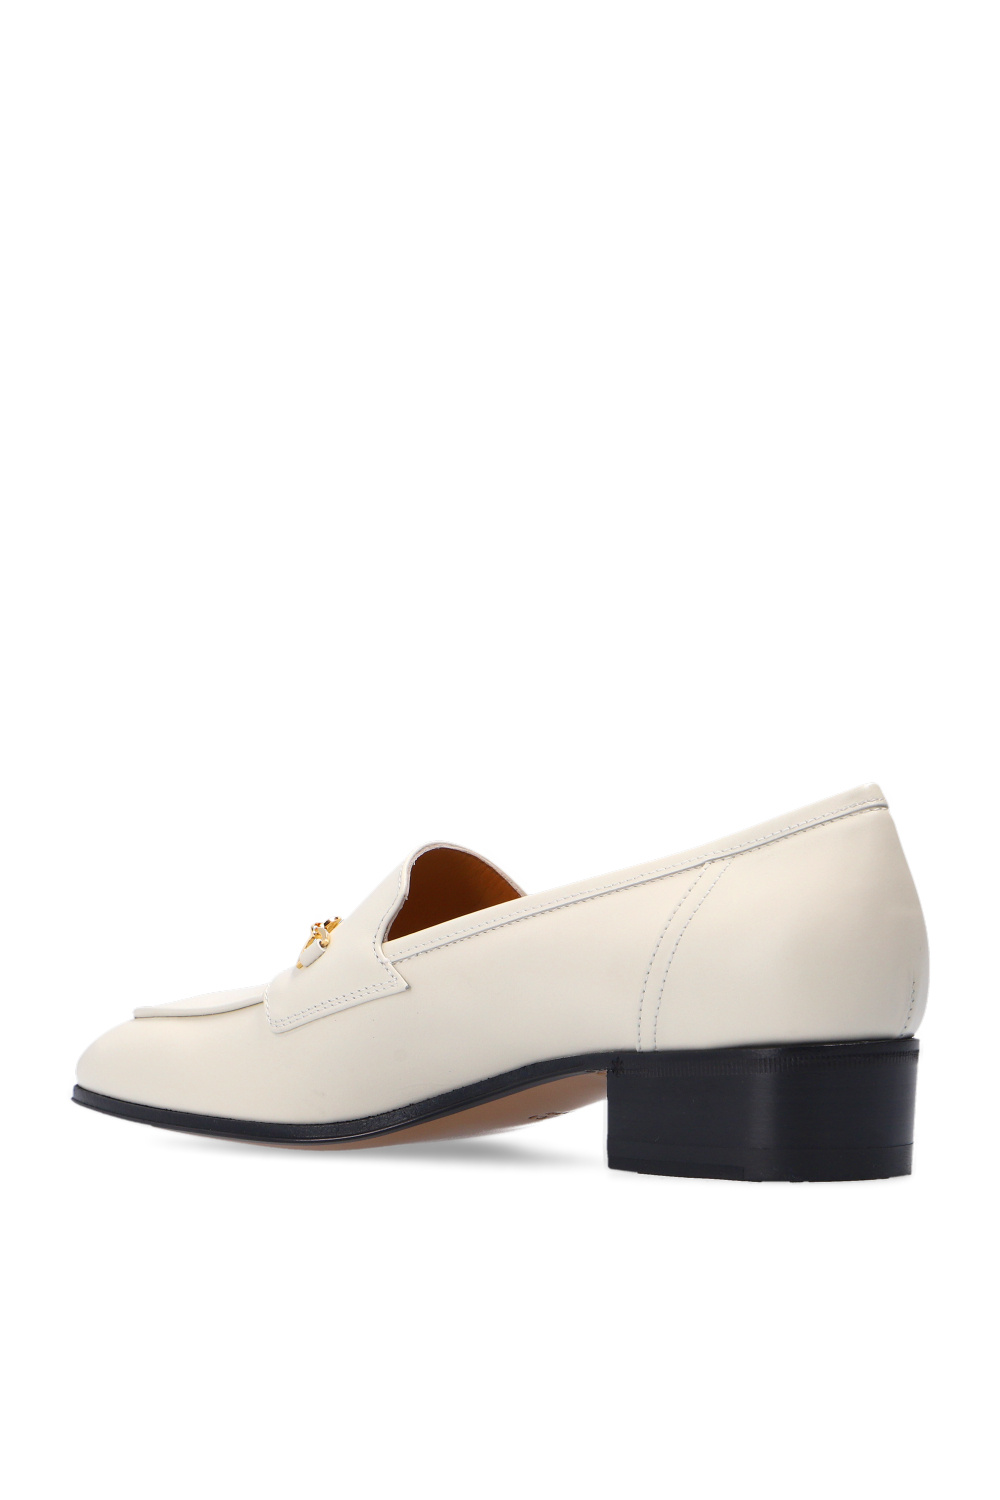 gucci pleated Leather loafers